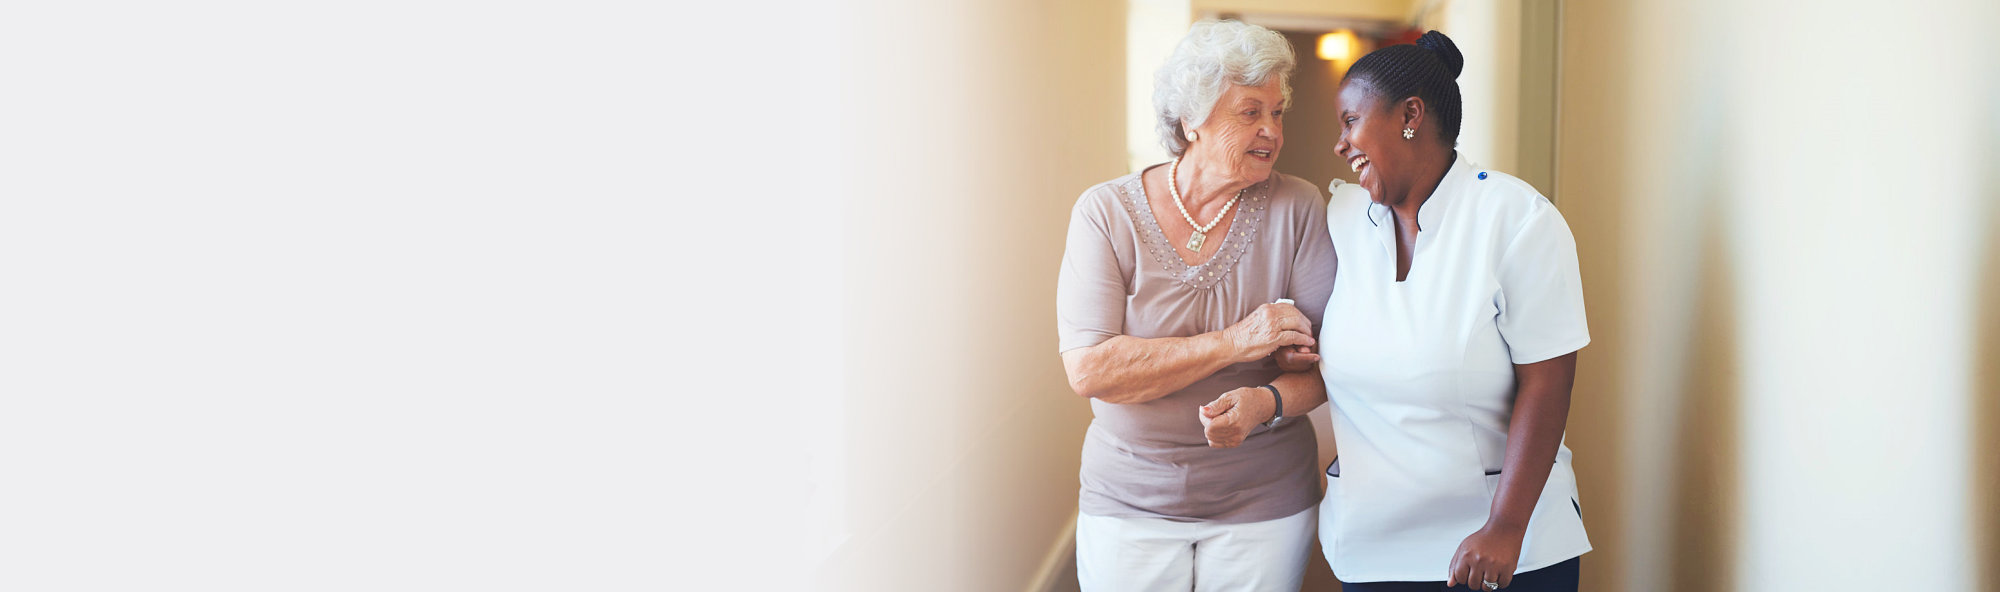 elderly woman in hallway assisted by a caregiver